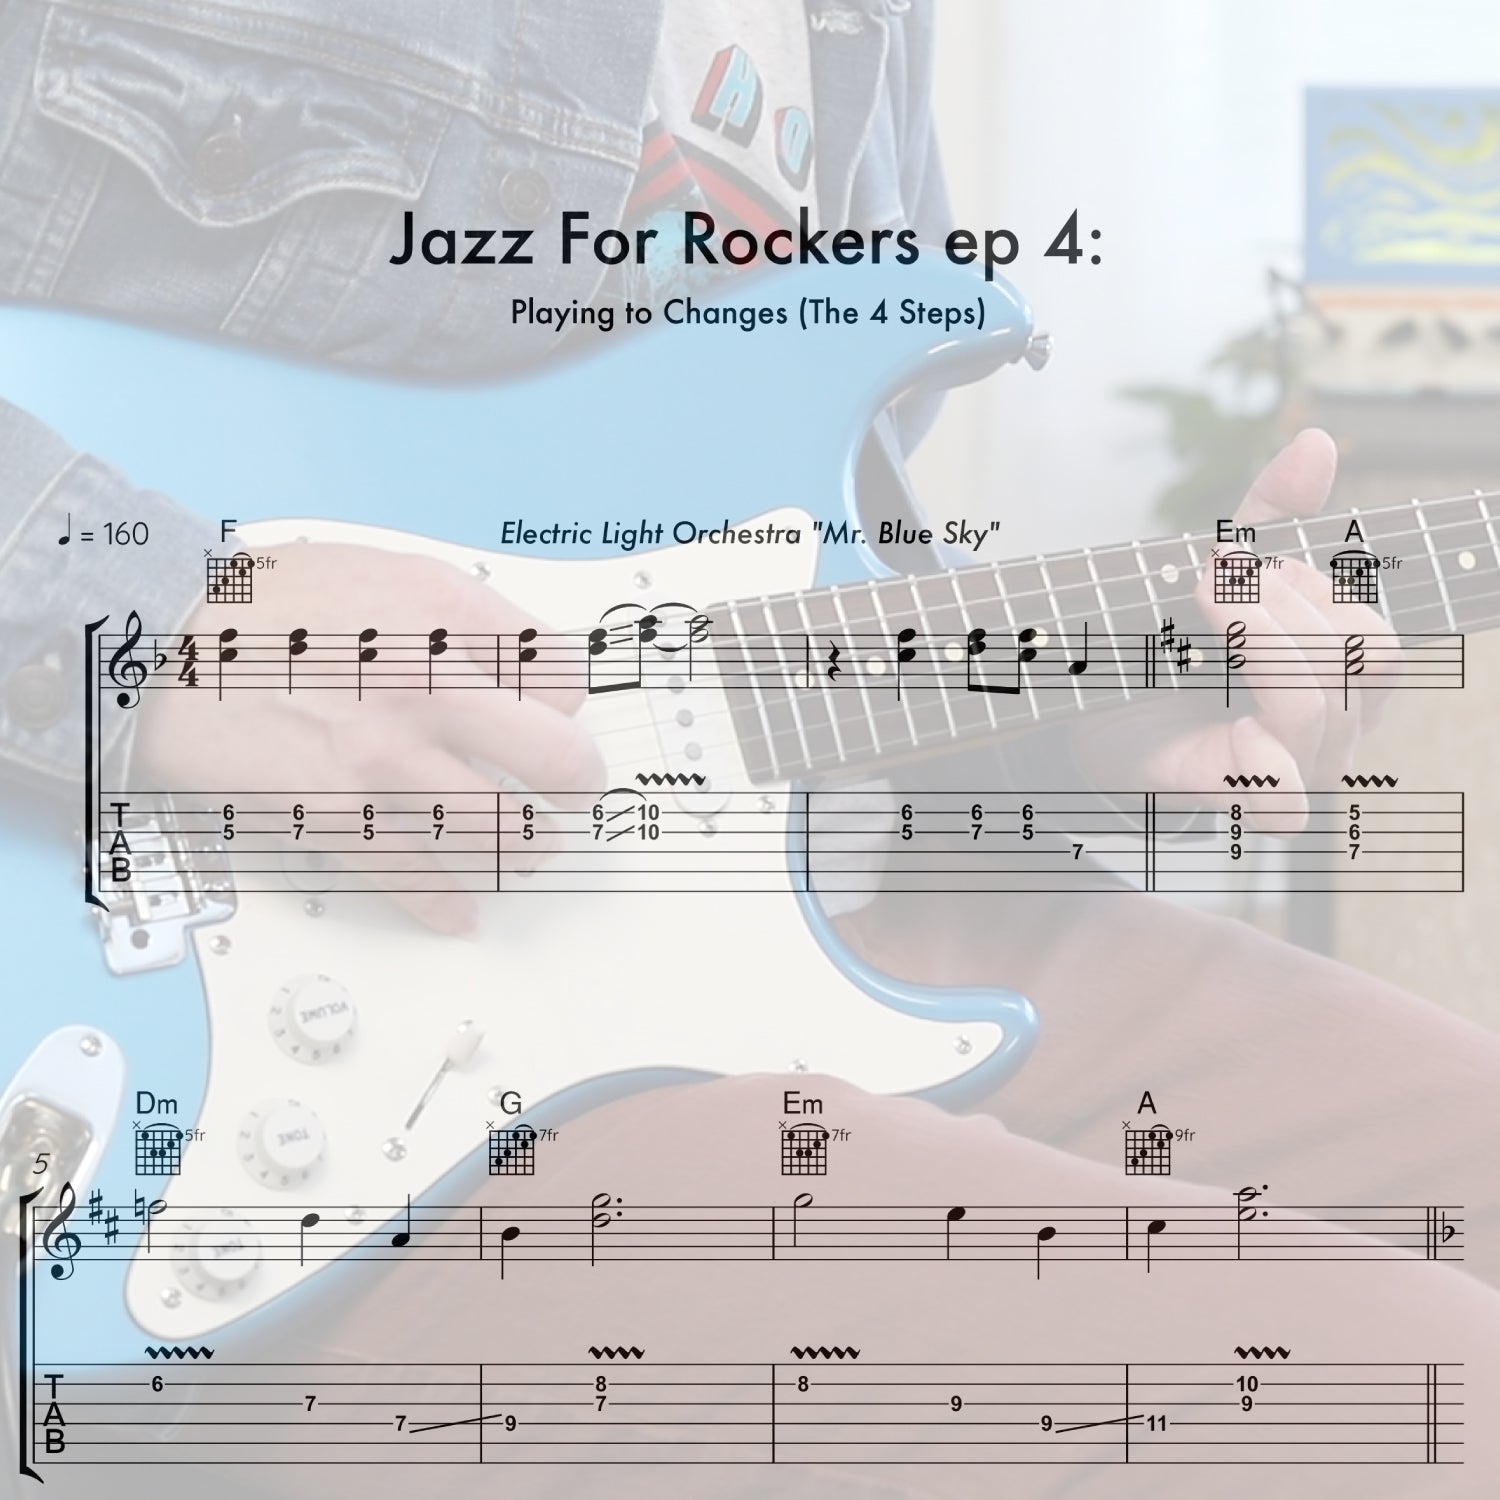 Jazz For Rockers ep 4: Playing To Changes (The 4 Steps)